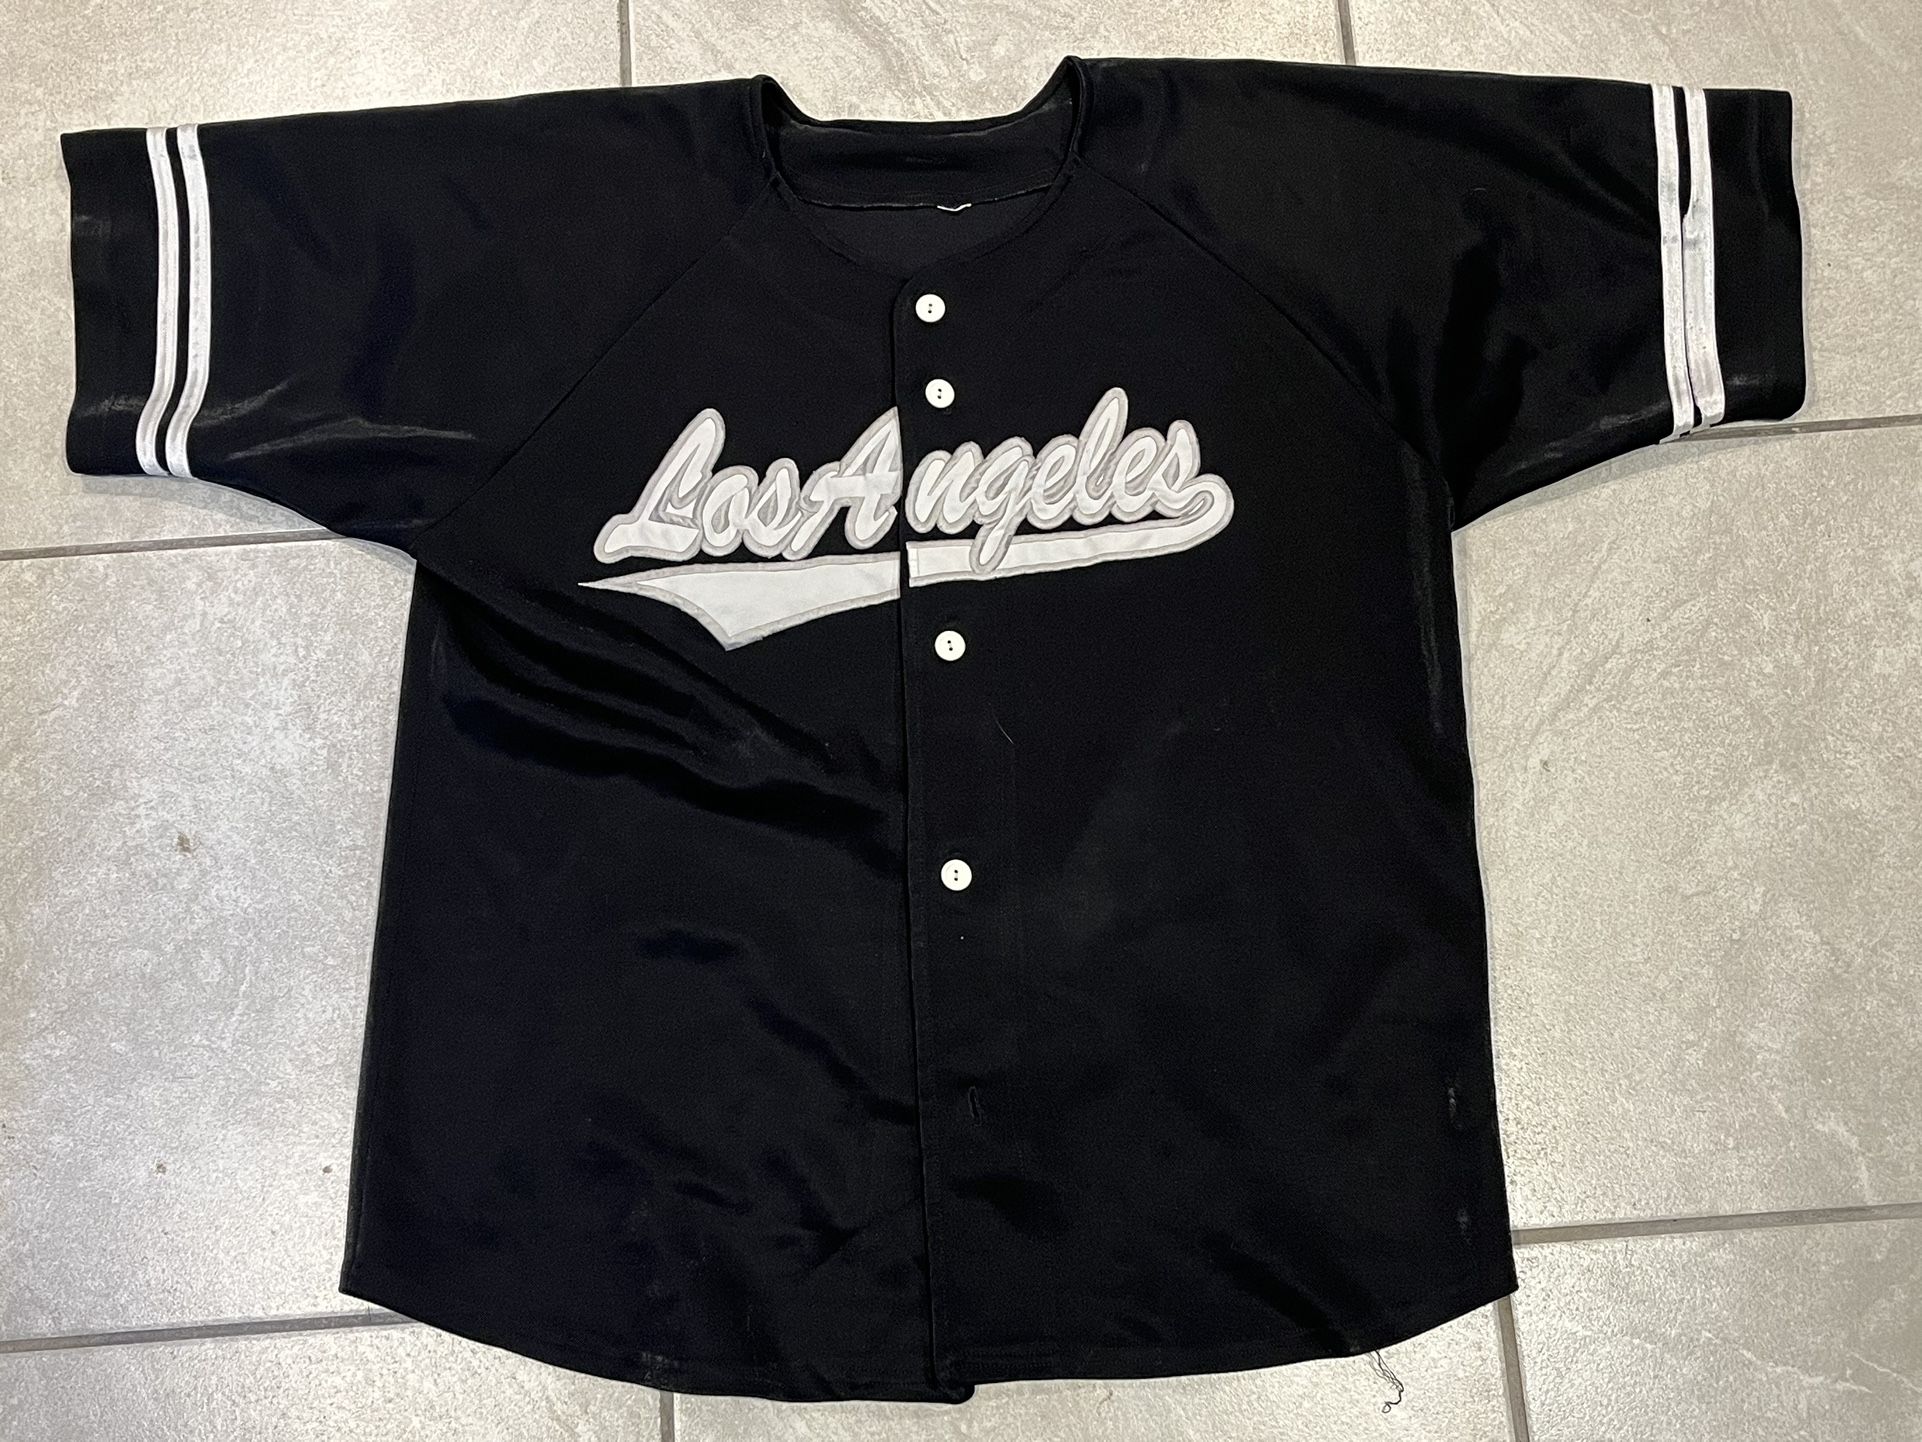 Los Angeles Baseball Jersey Size XL preowned